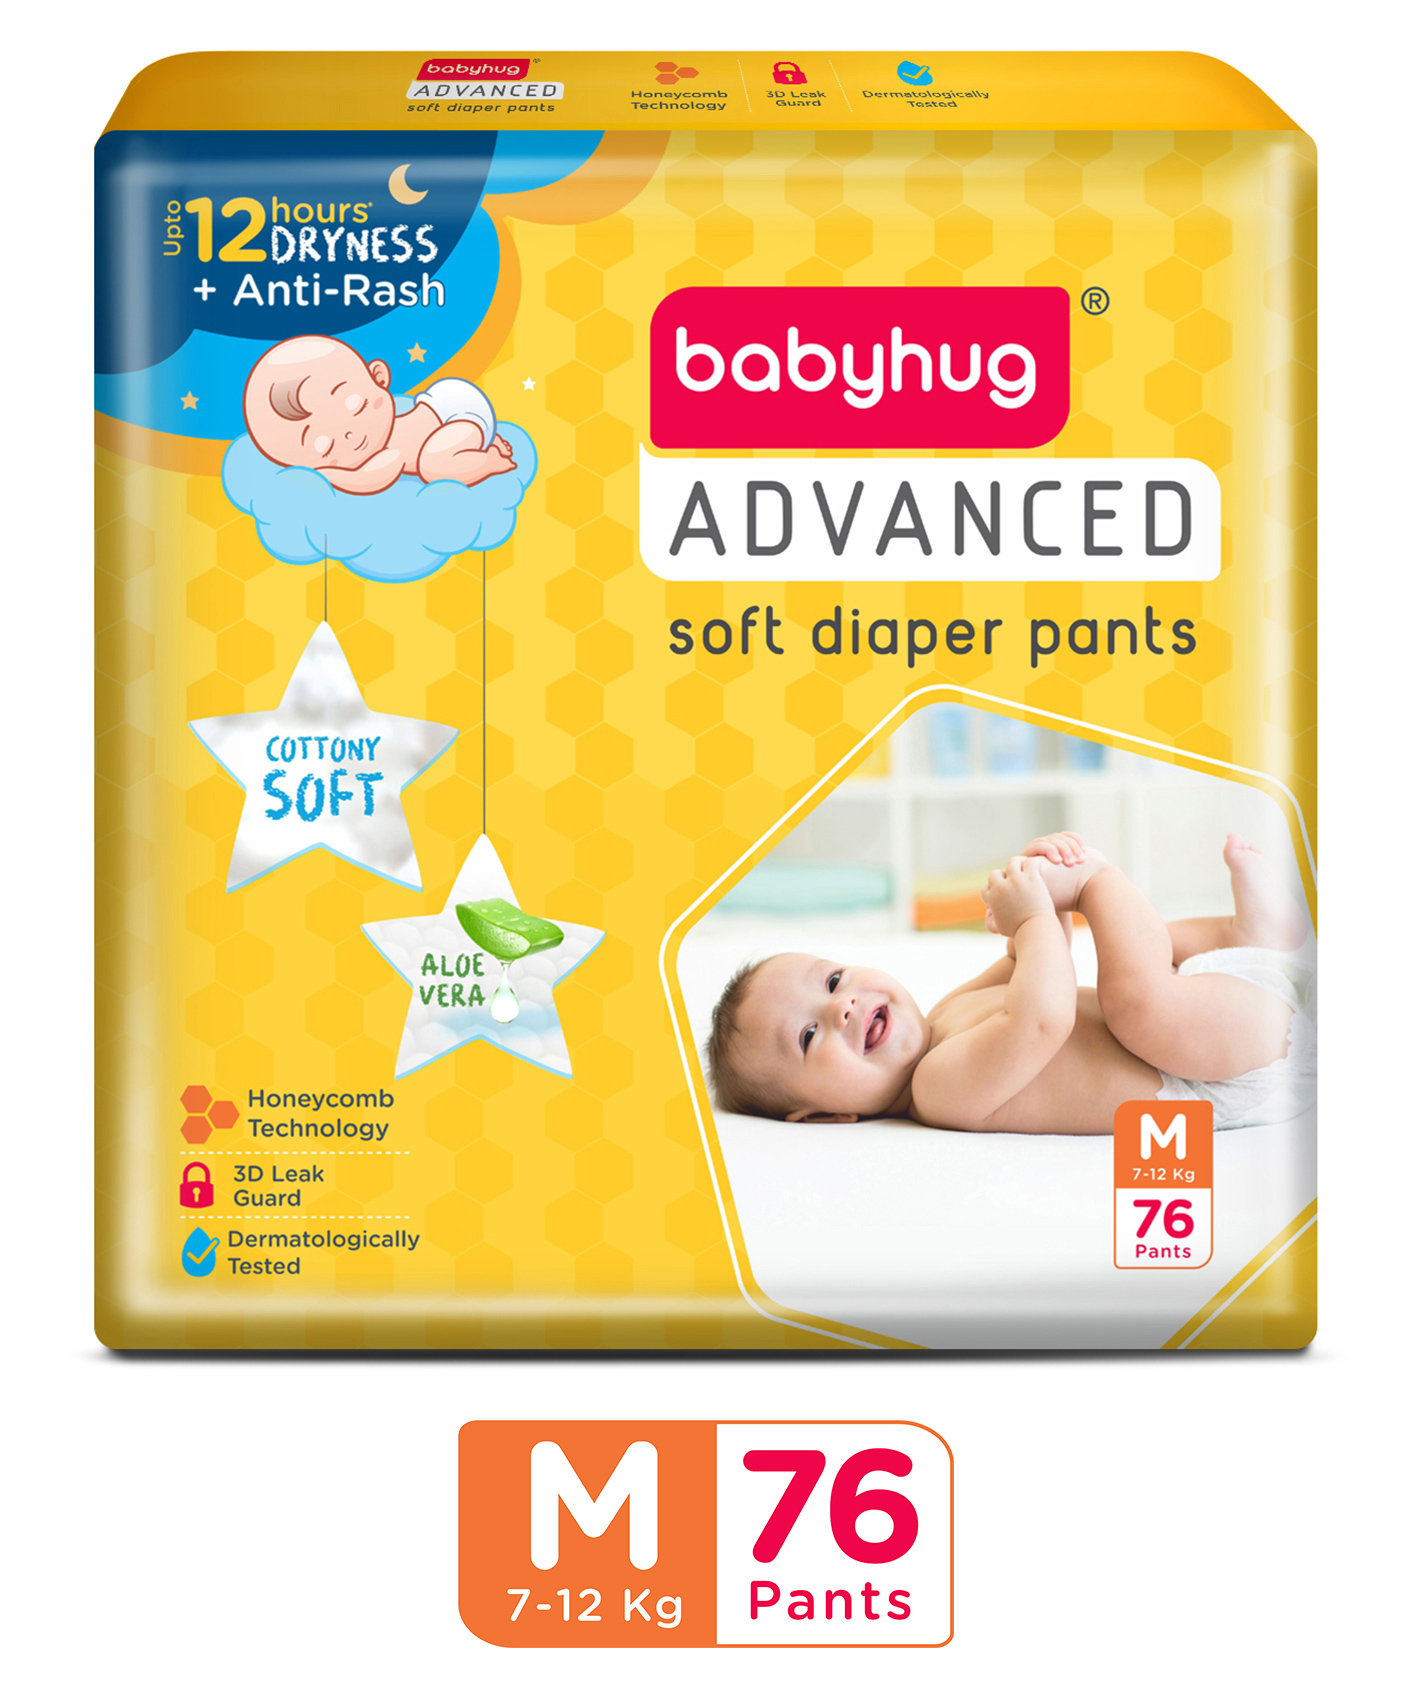 Aquarium enkel juni Babyhug Advanced Pant Style Diapers Medium - 76 Pieces Online in India, Buy  at Best Price from FirstCry.com - 2874154